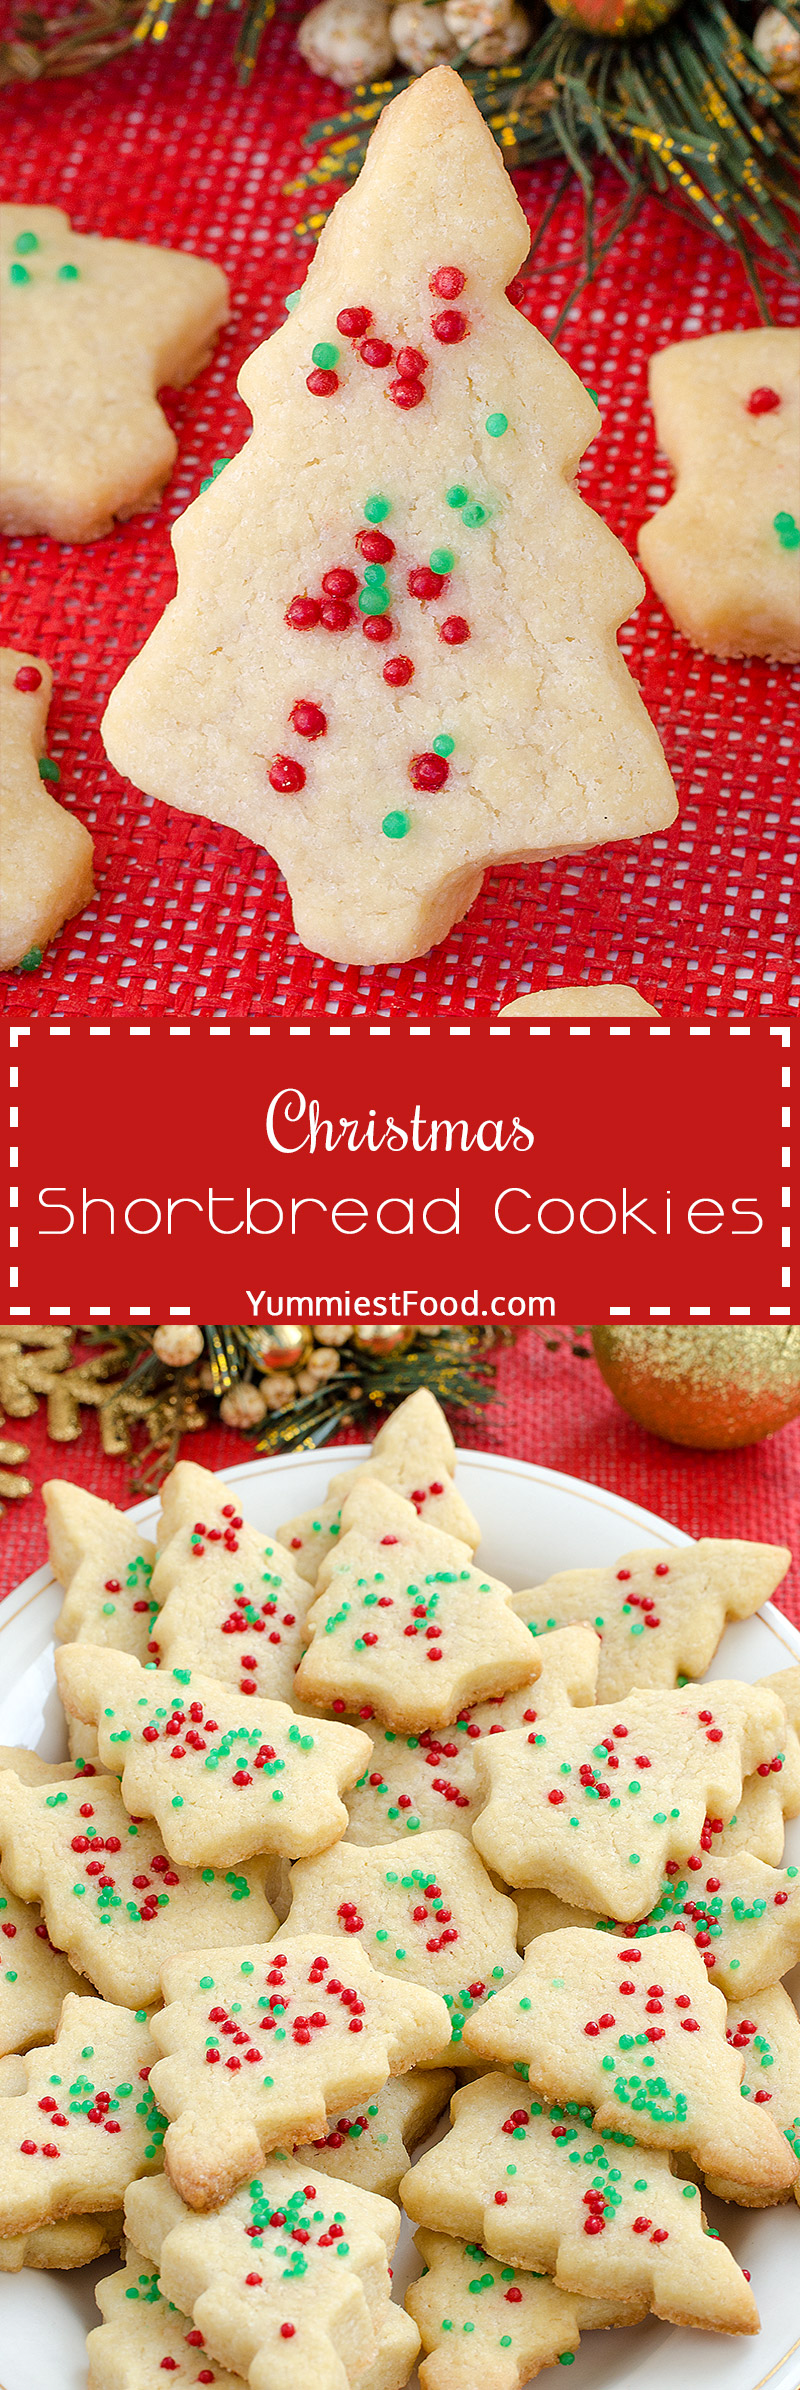 Christmas Shortbread Cookies Recipe - adorable, delicious, and tasty Shortbread Cookies with only 4 ingredients